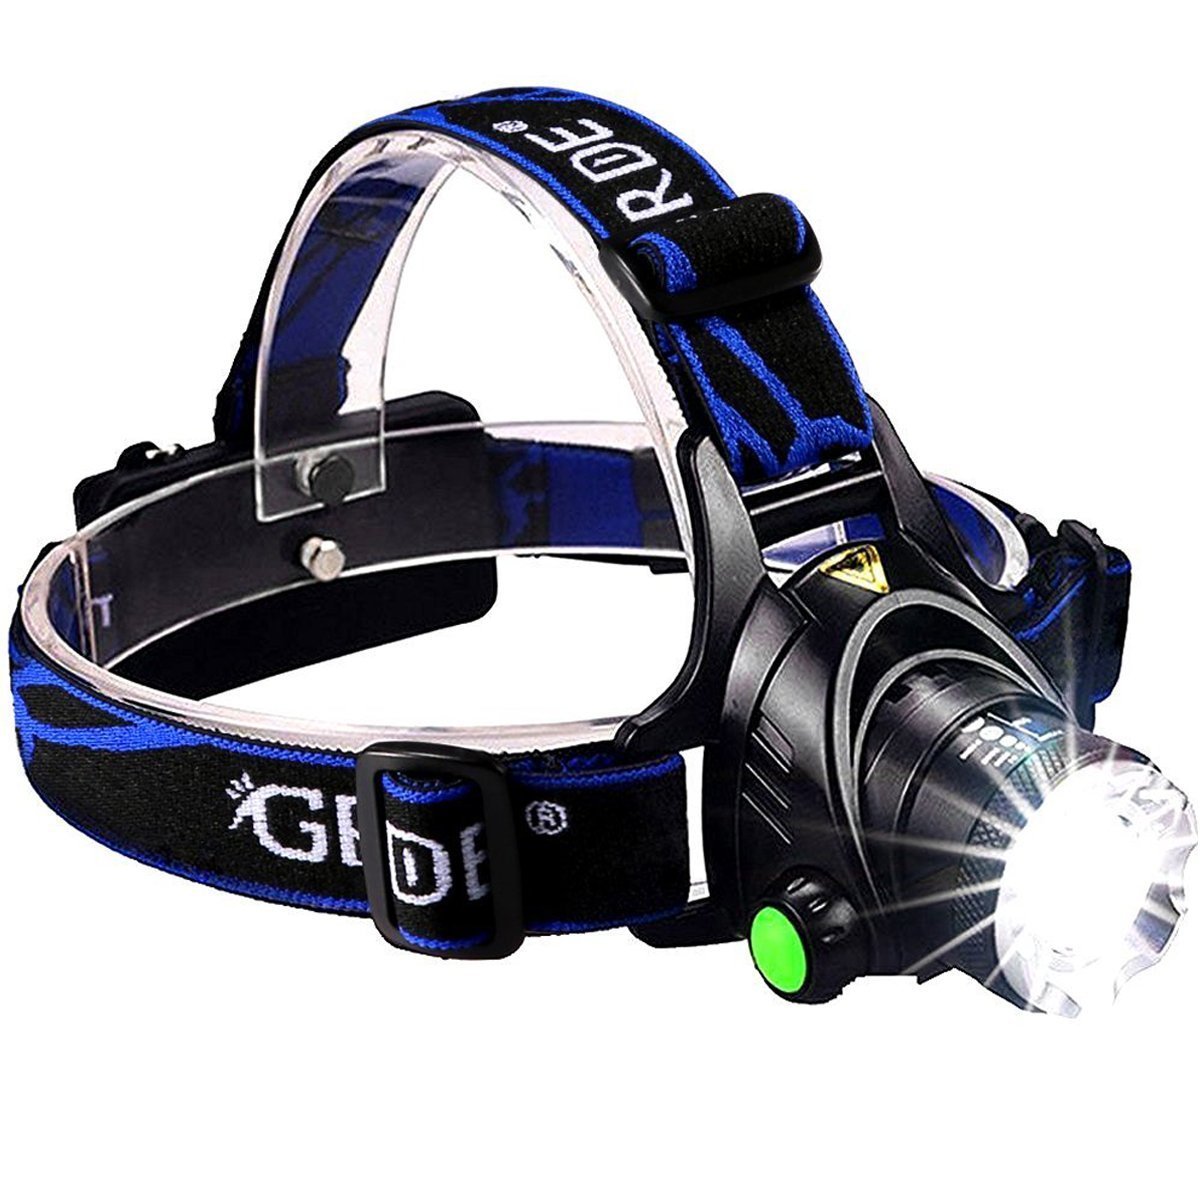 8 Best Headlamps for Camping, Hiking (Reviews& Buyer Guide 2020 ) The